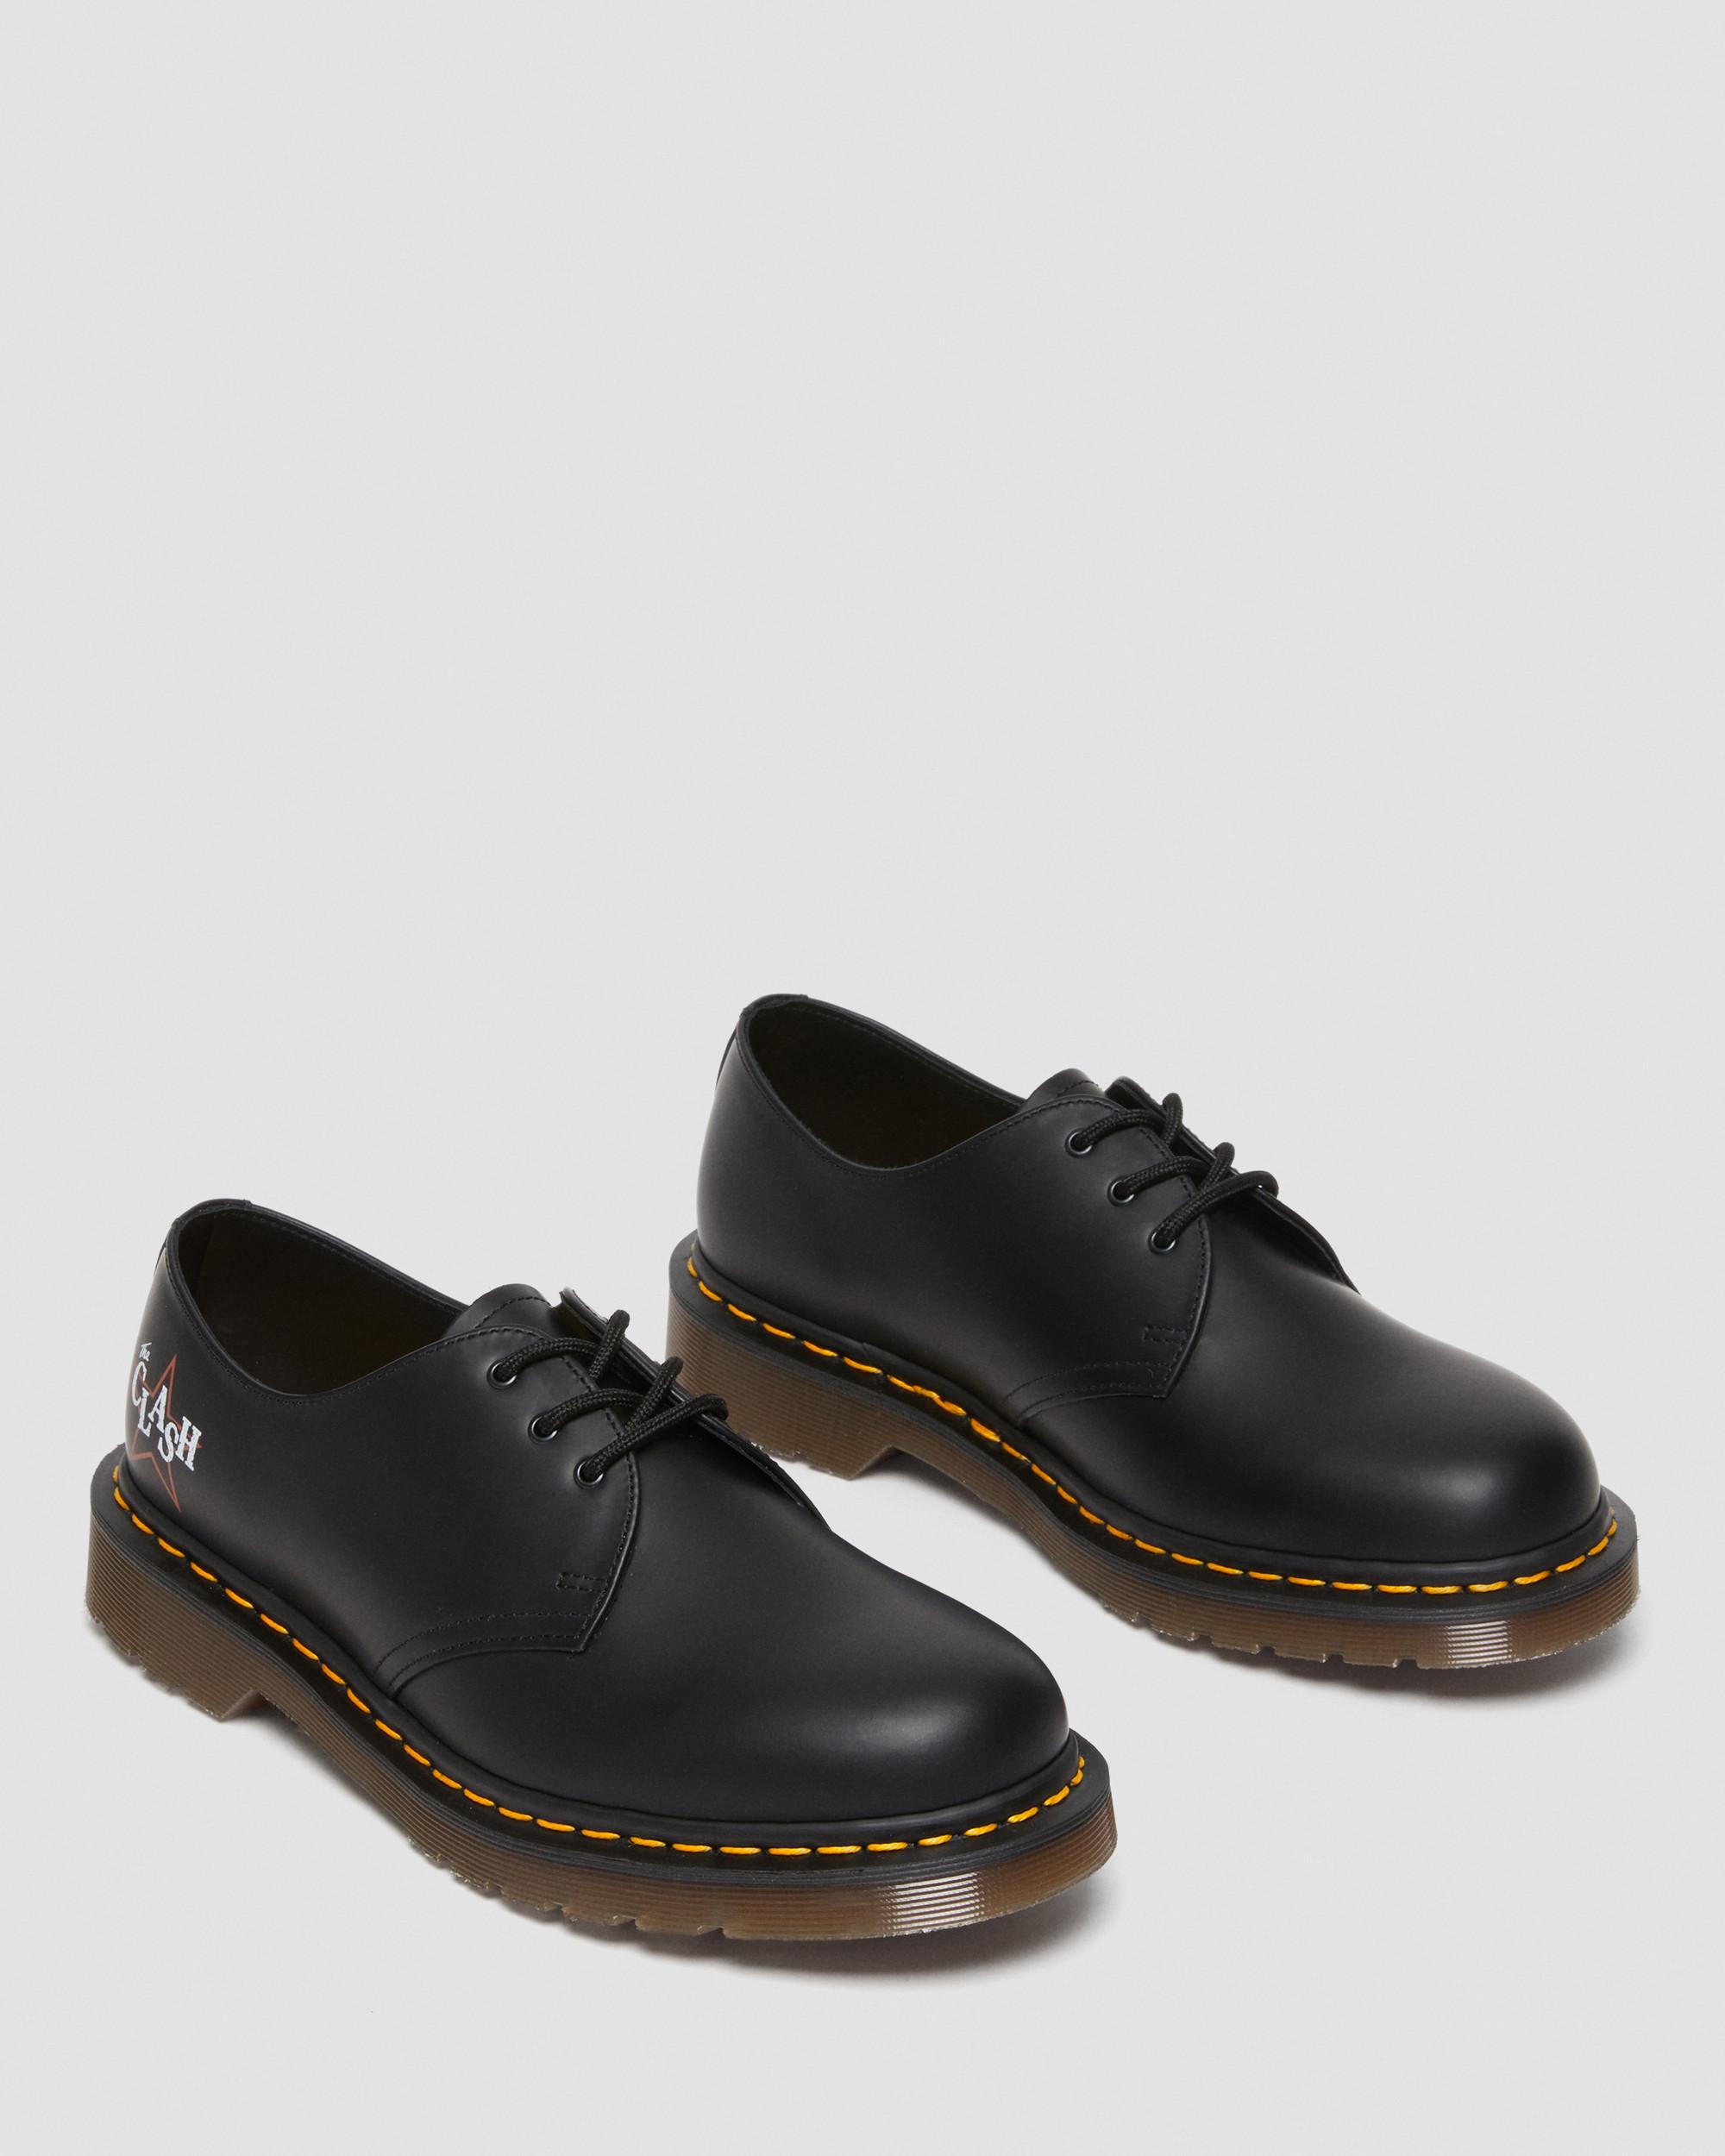 1461 THE CLASH Made In England Leather Shoes | Dr. Martens